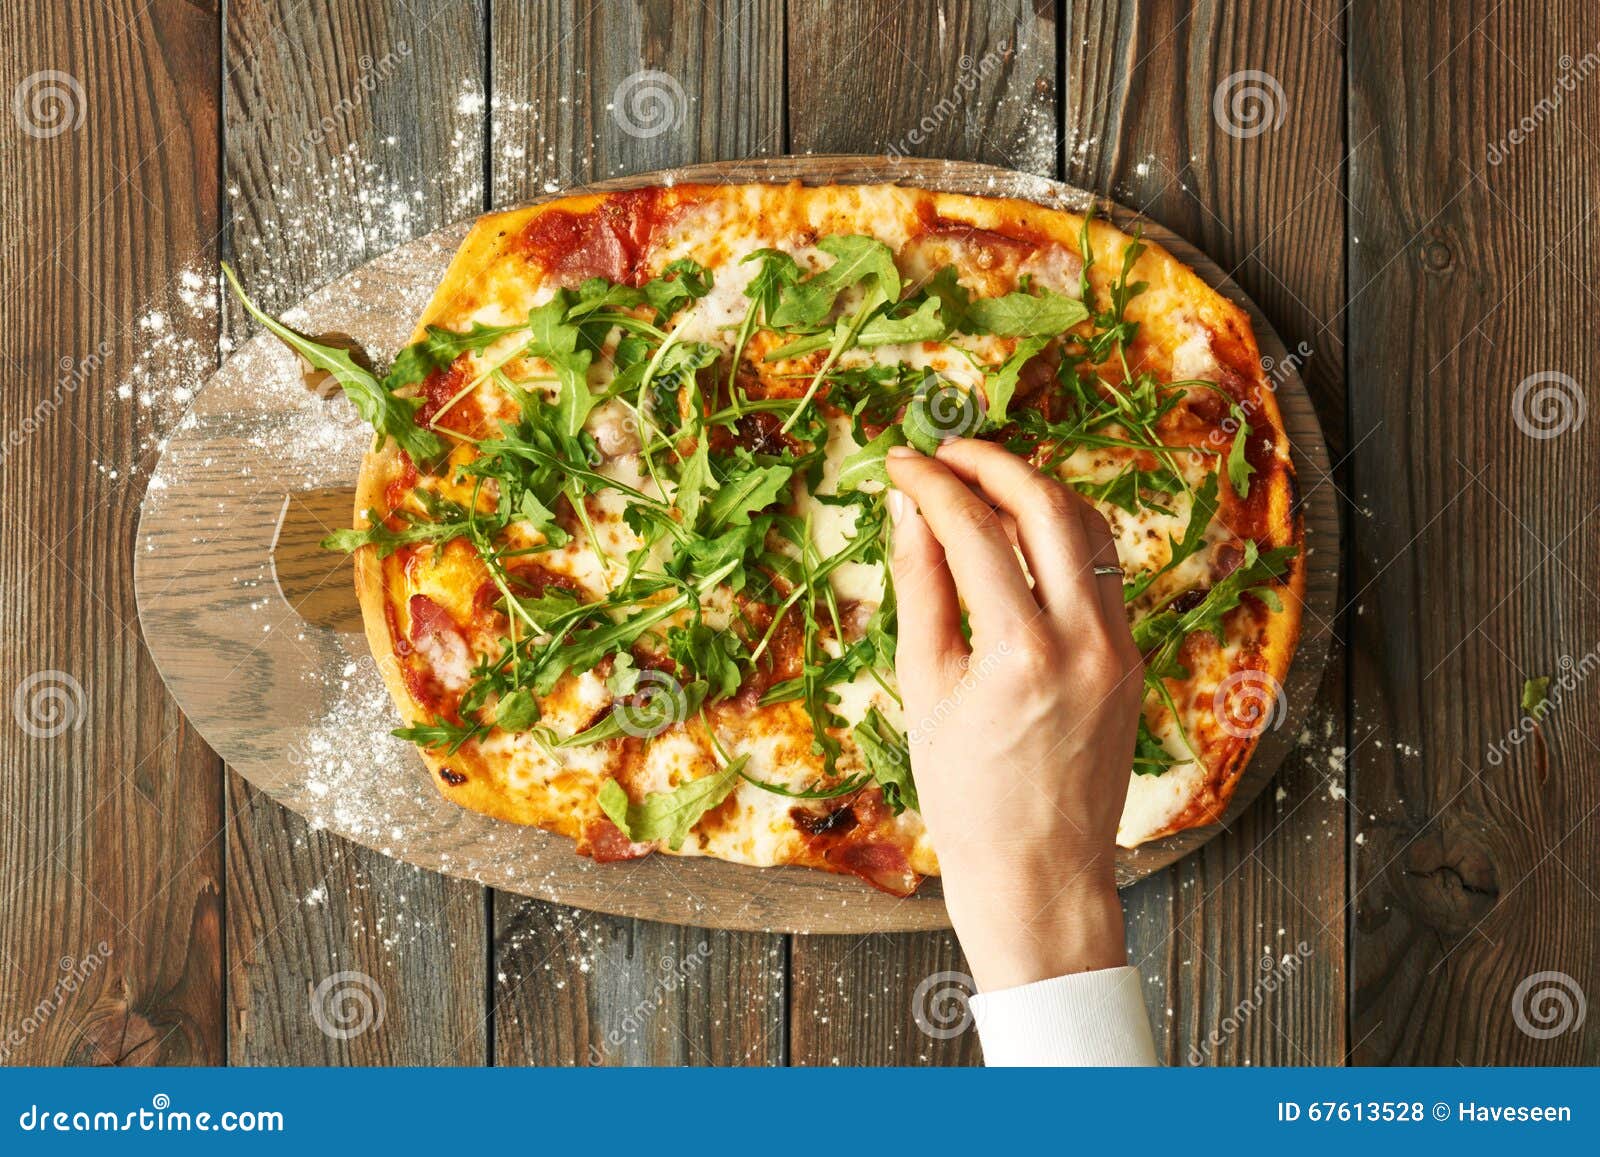 Home Made Pizza on Wooden Table Stock Photo - Image of baked, kitchen ...